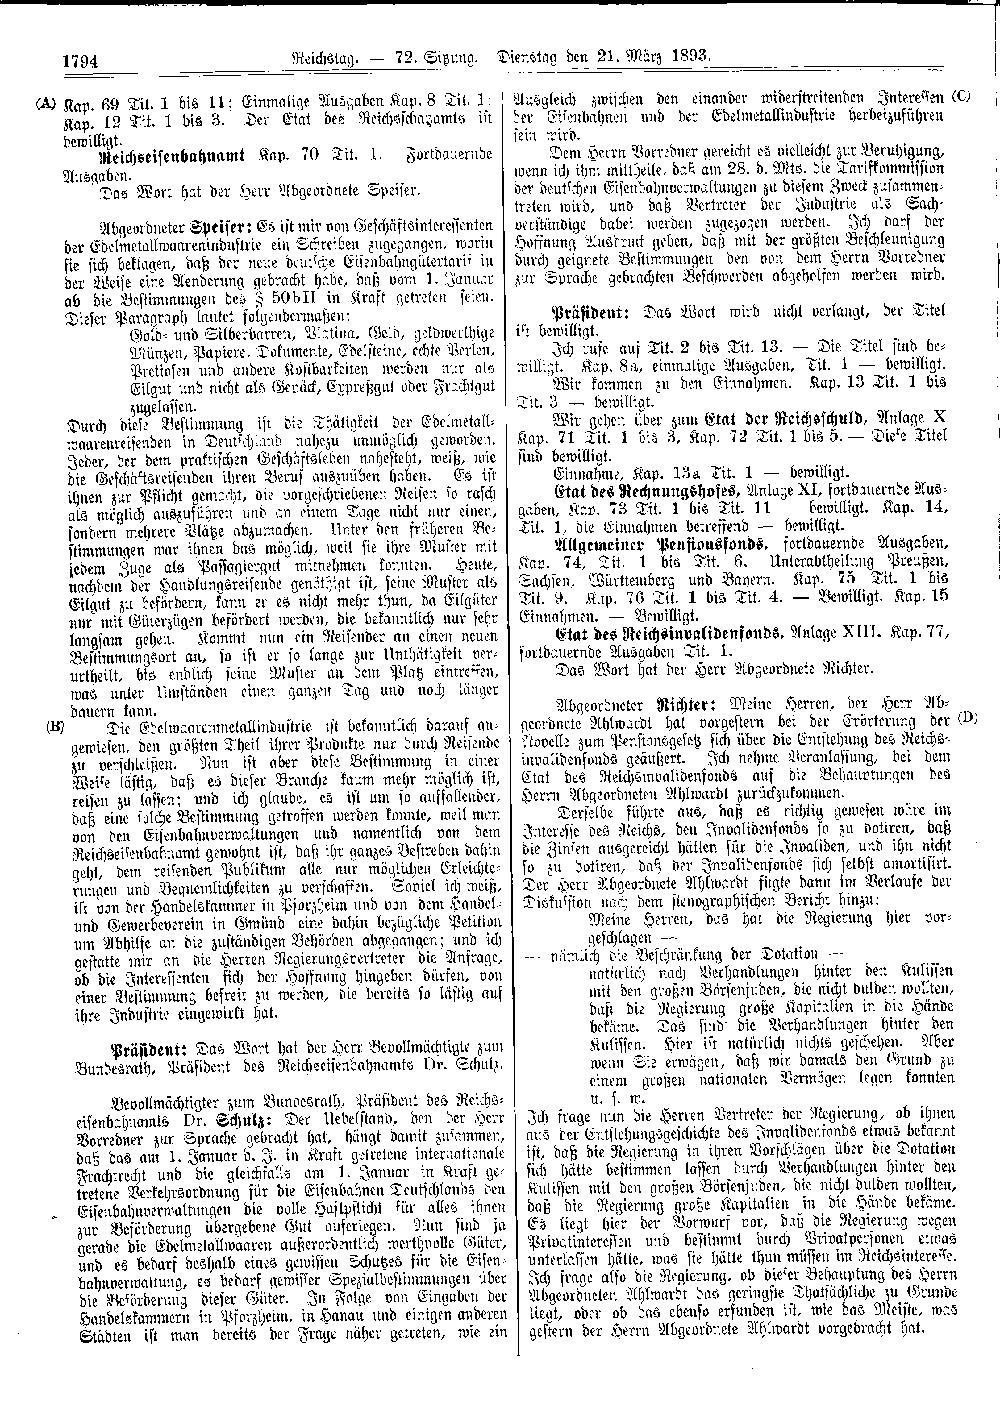 Scan of page 1794